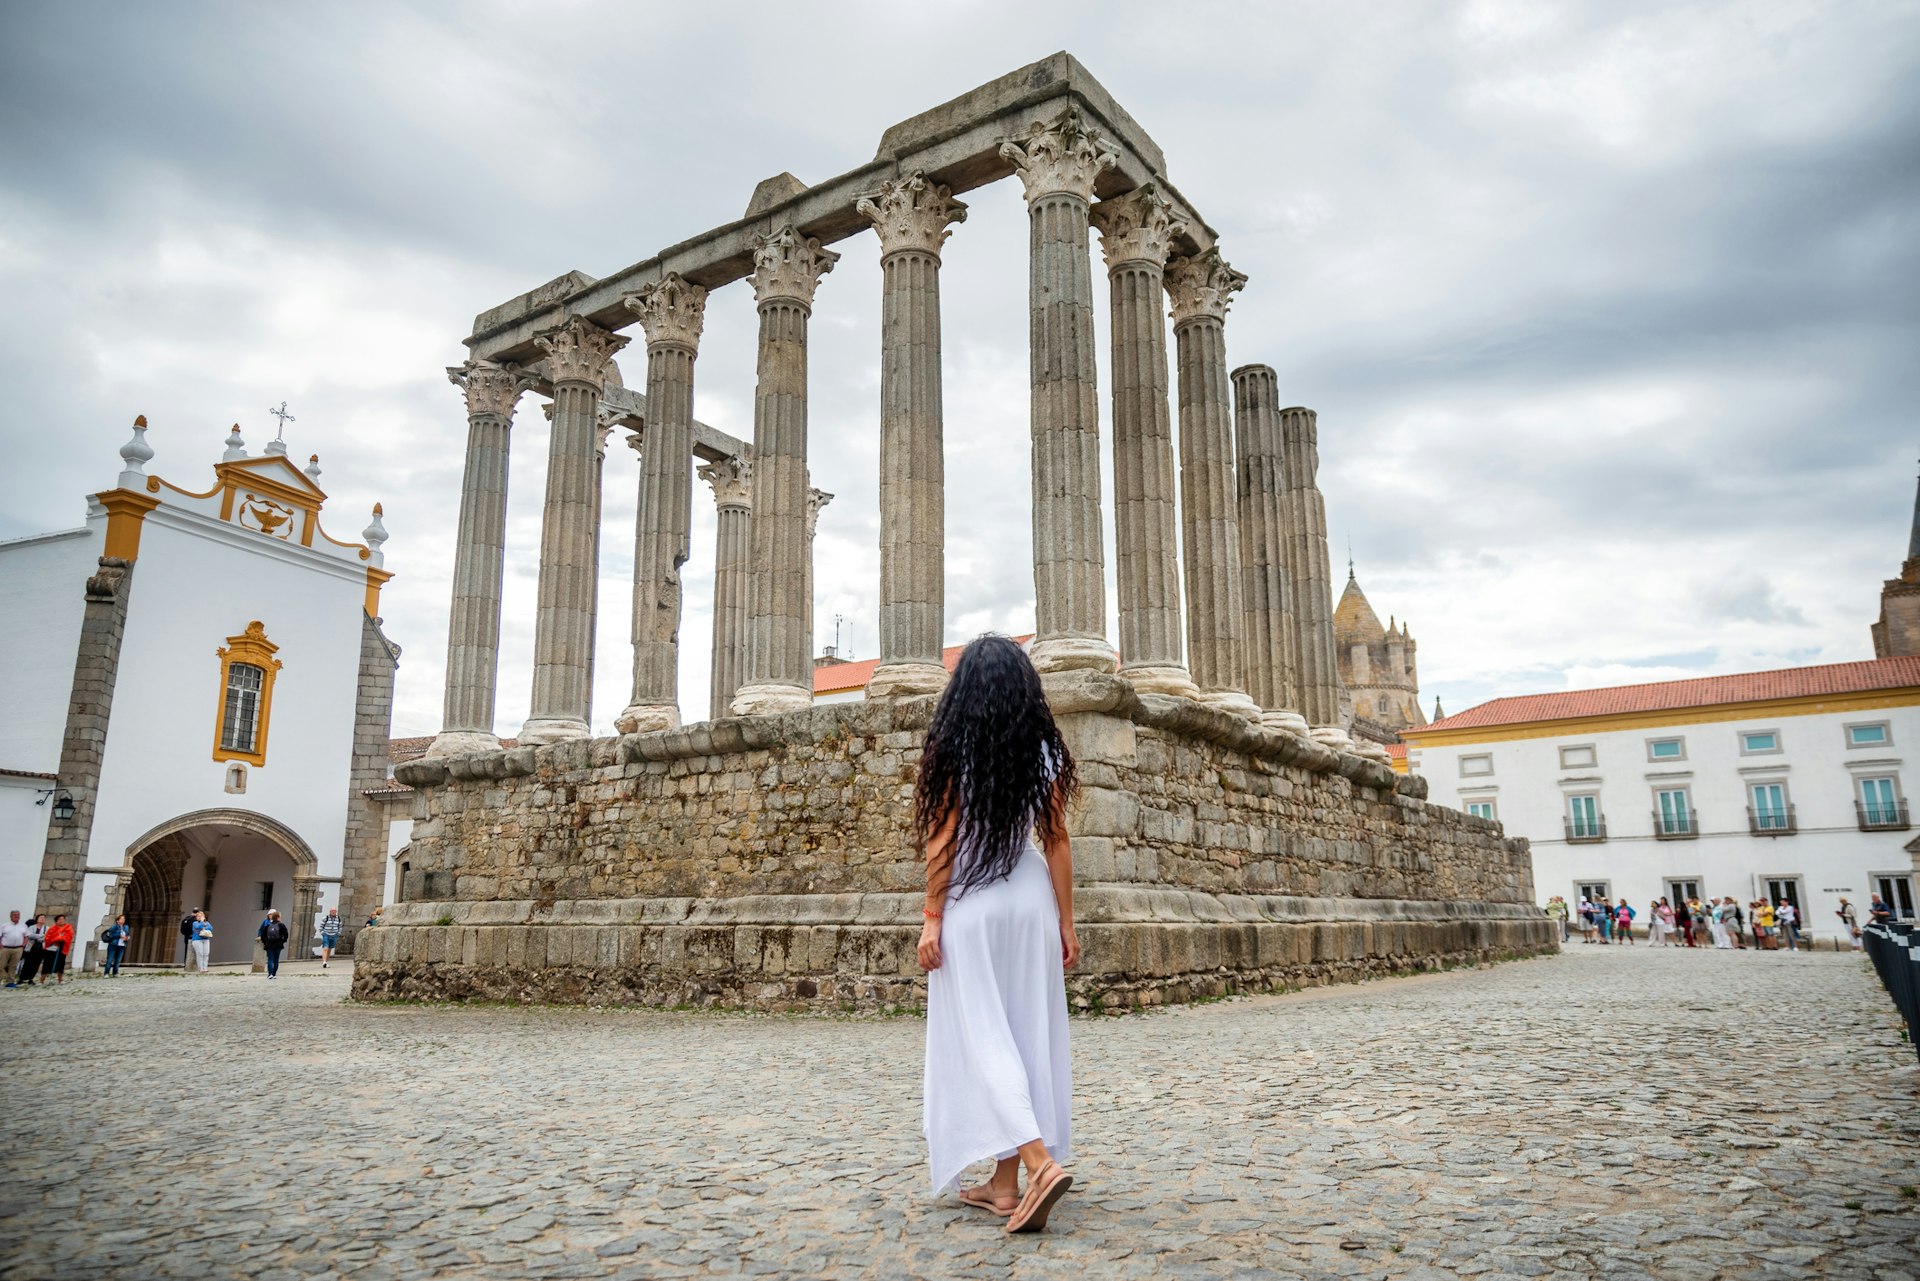 rear view of portuguese woman with white long dress in front of Roman ruins of Diana temple, Evora, Portugal